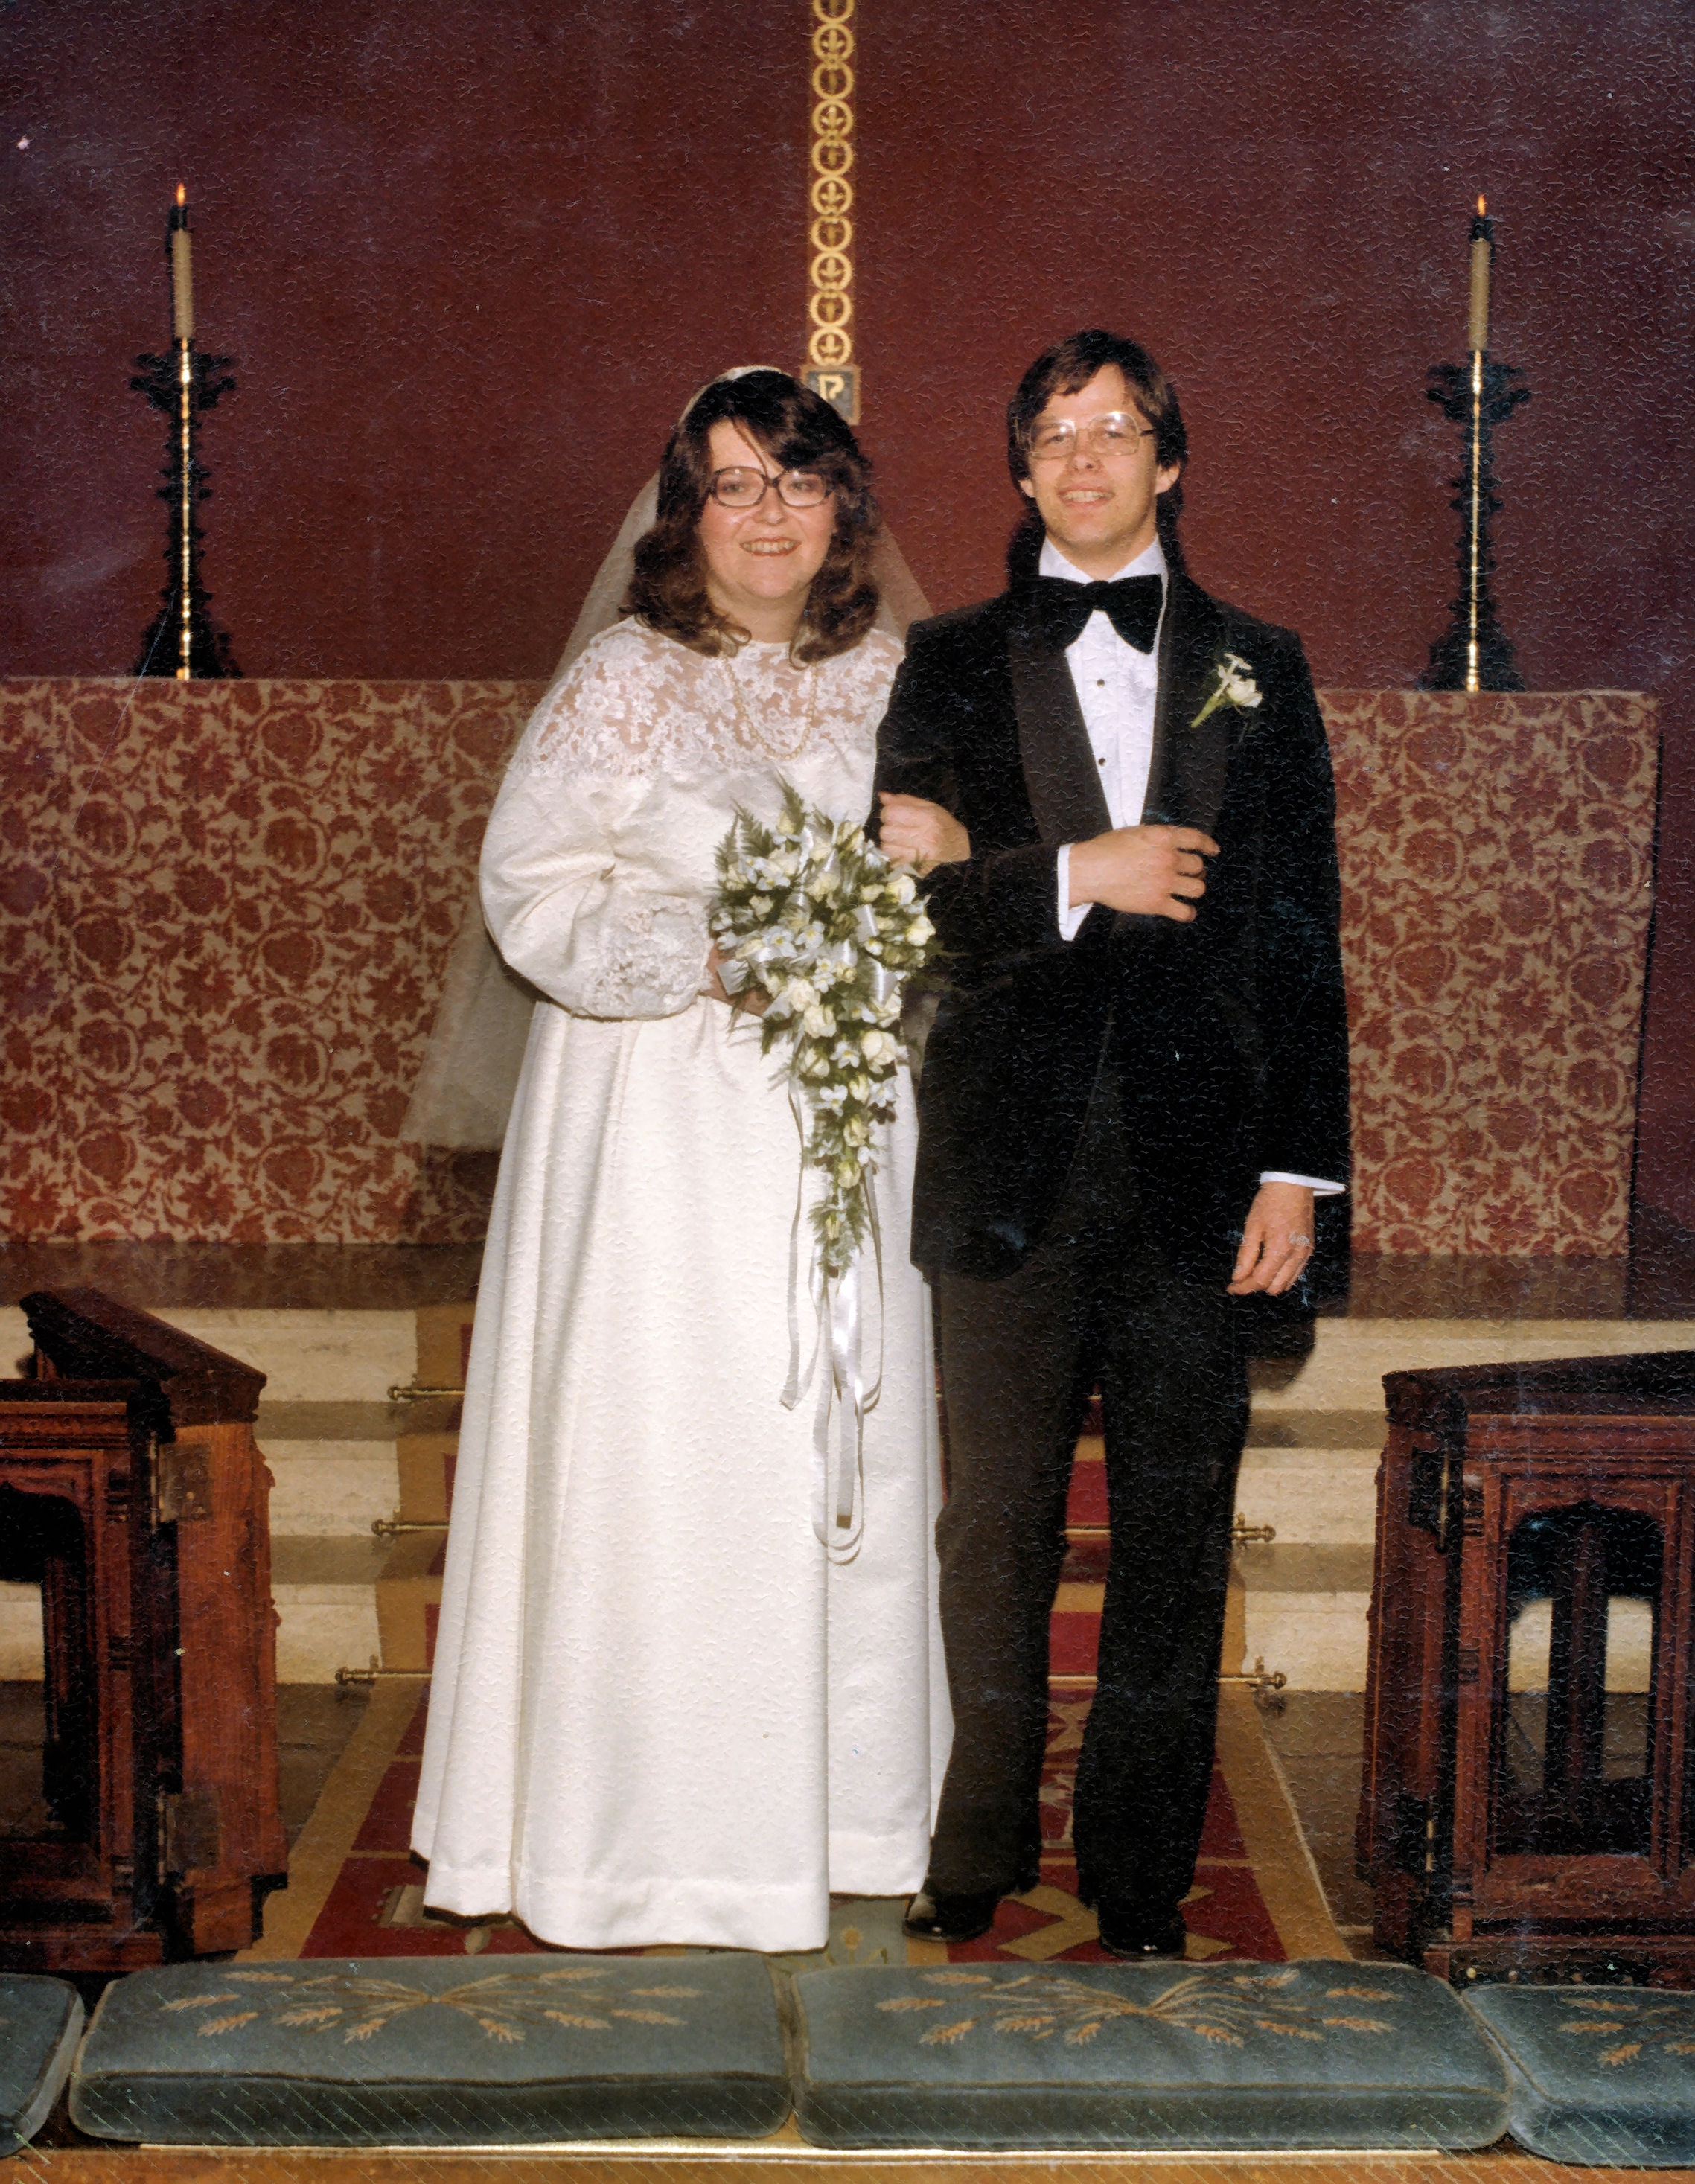 Wedding of Leila Phelps and Micheal Brandt 1978